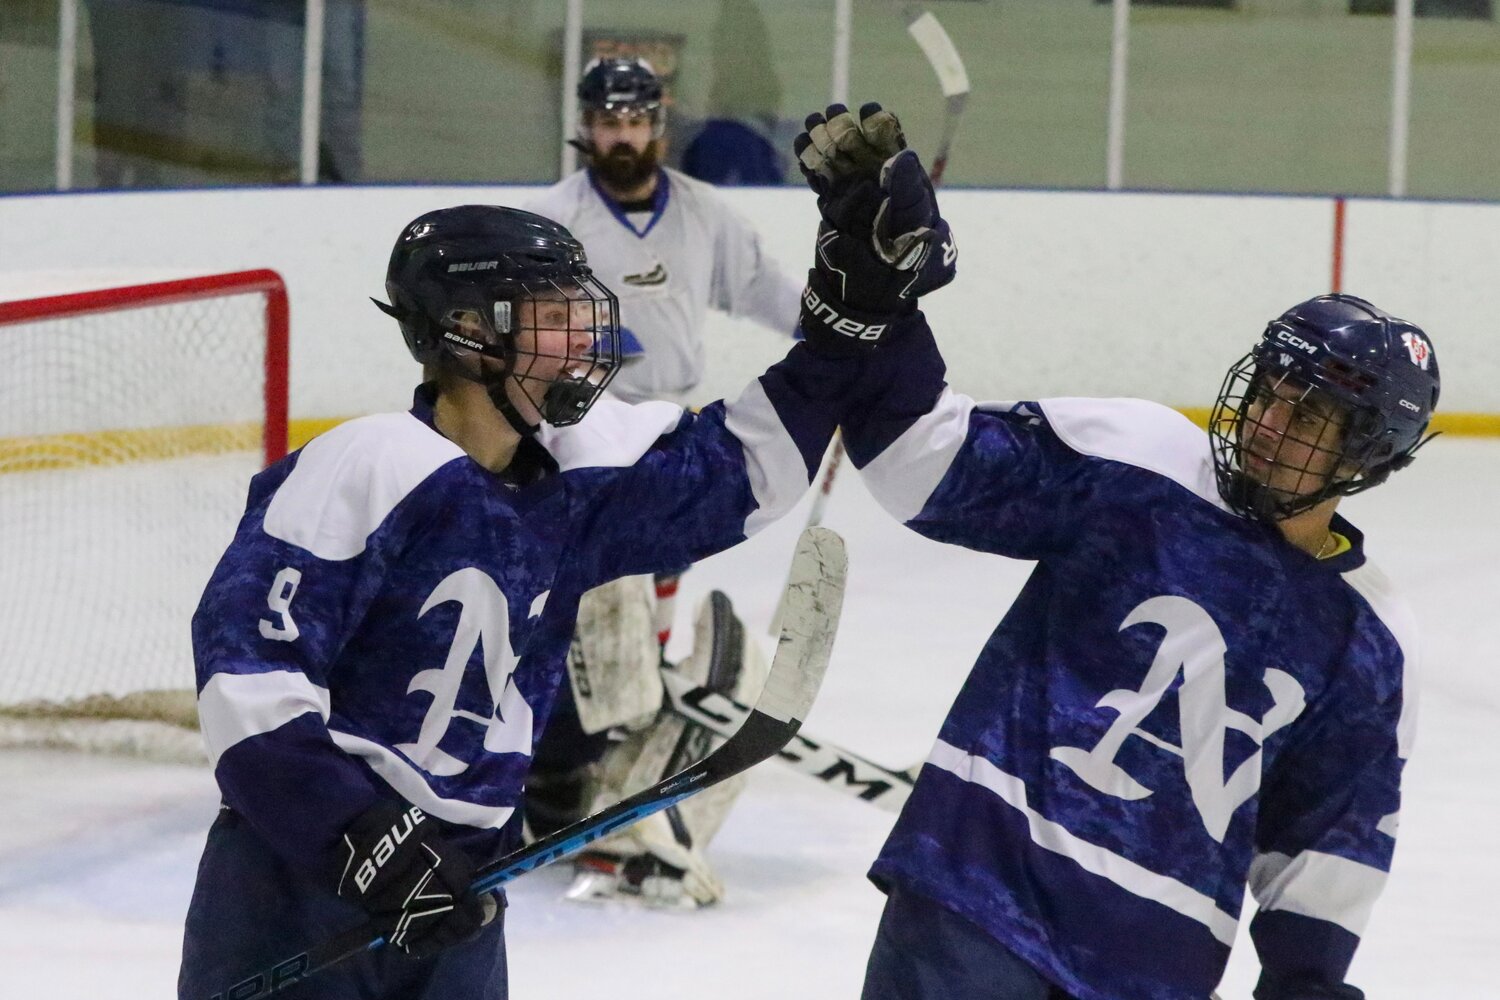 The NHS varsity boys hockey team faced off against alumni Saturday afternoon at Nantucket Ice.